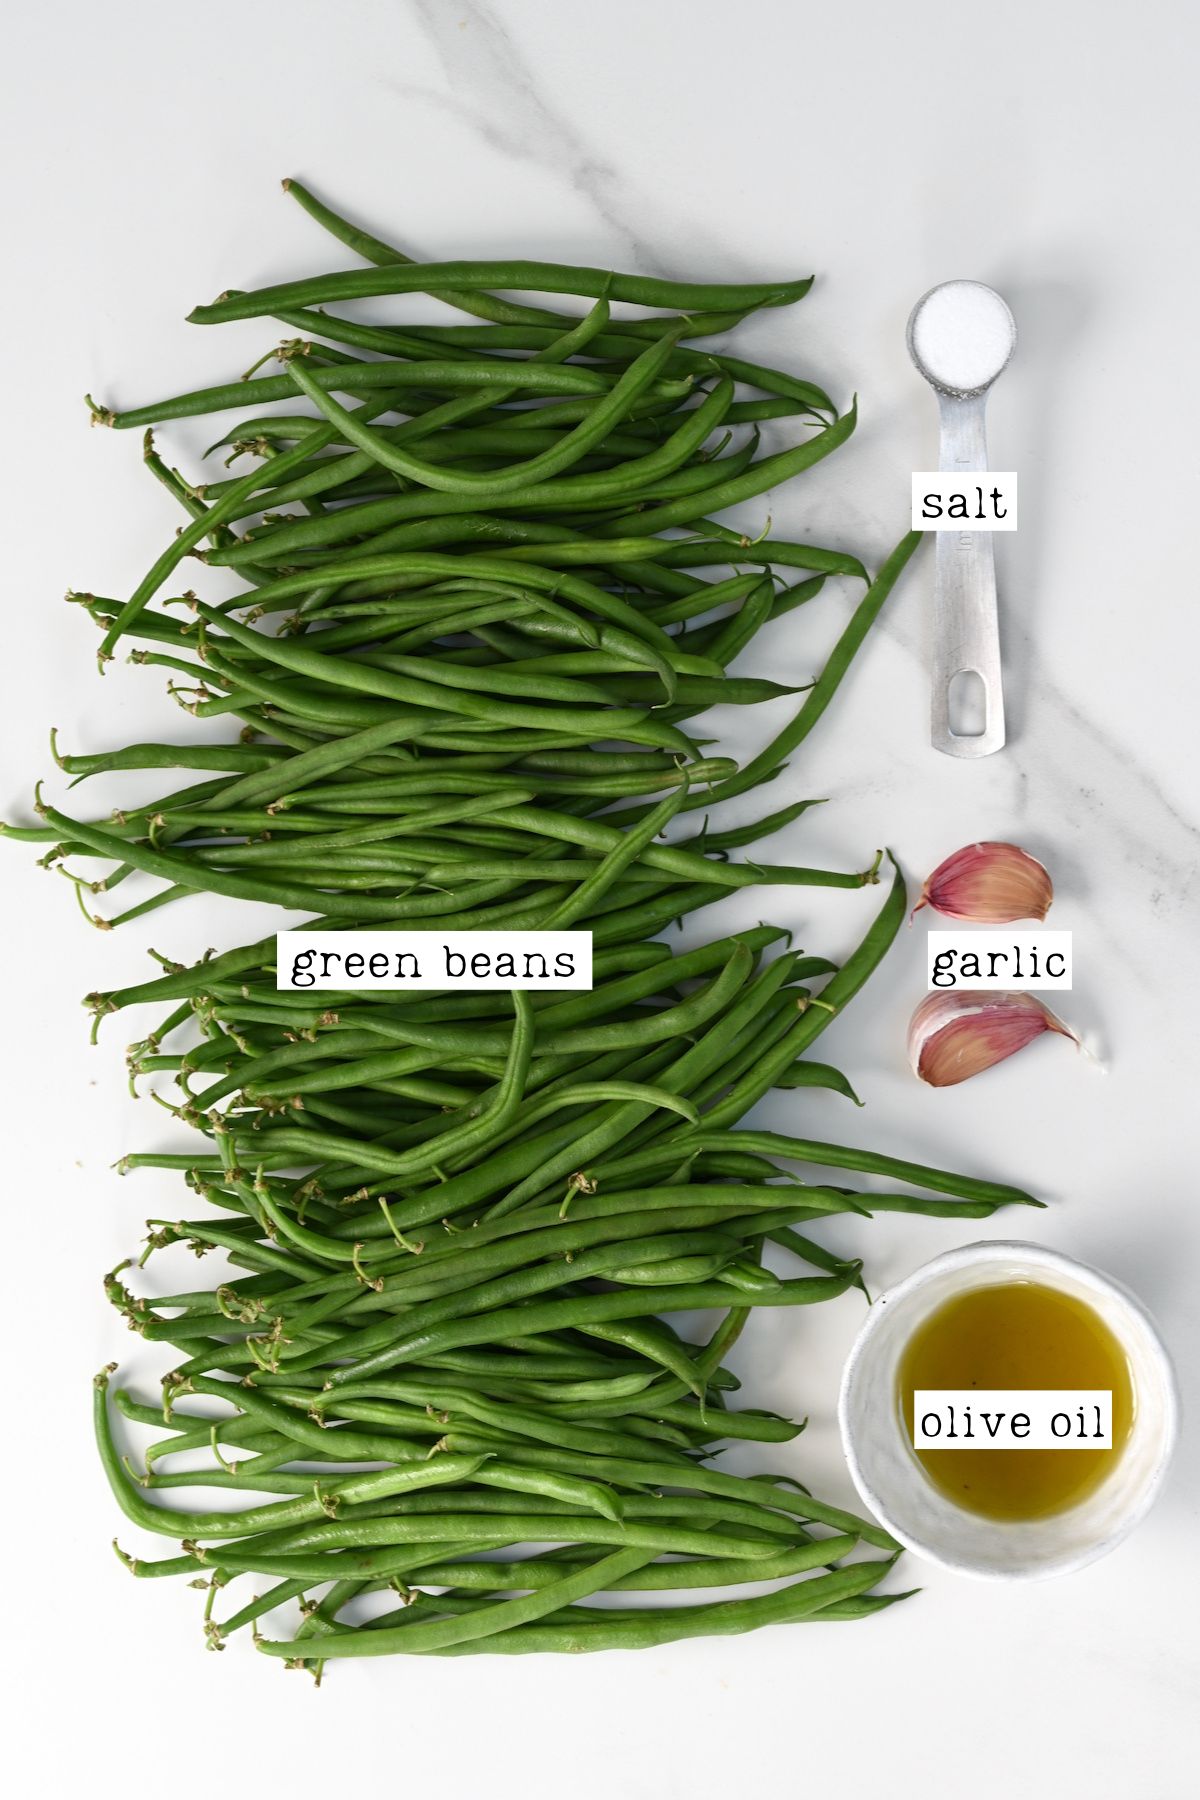 Ingredients for Sautéed Green Beans